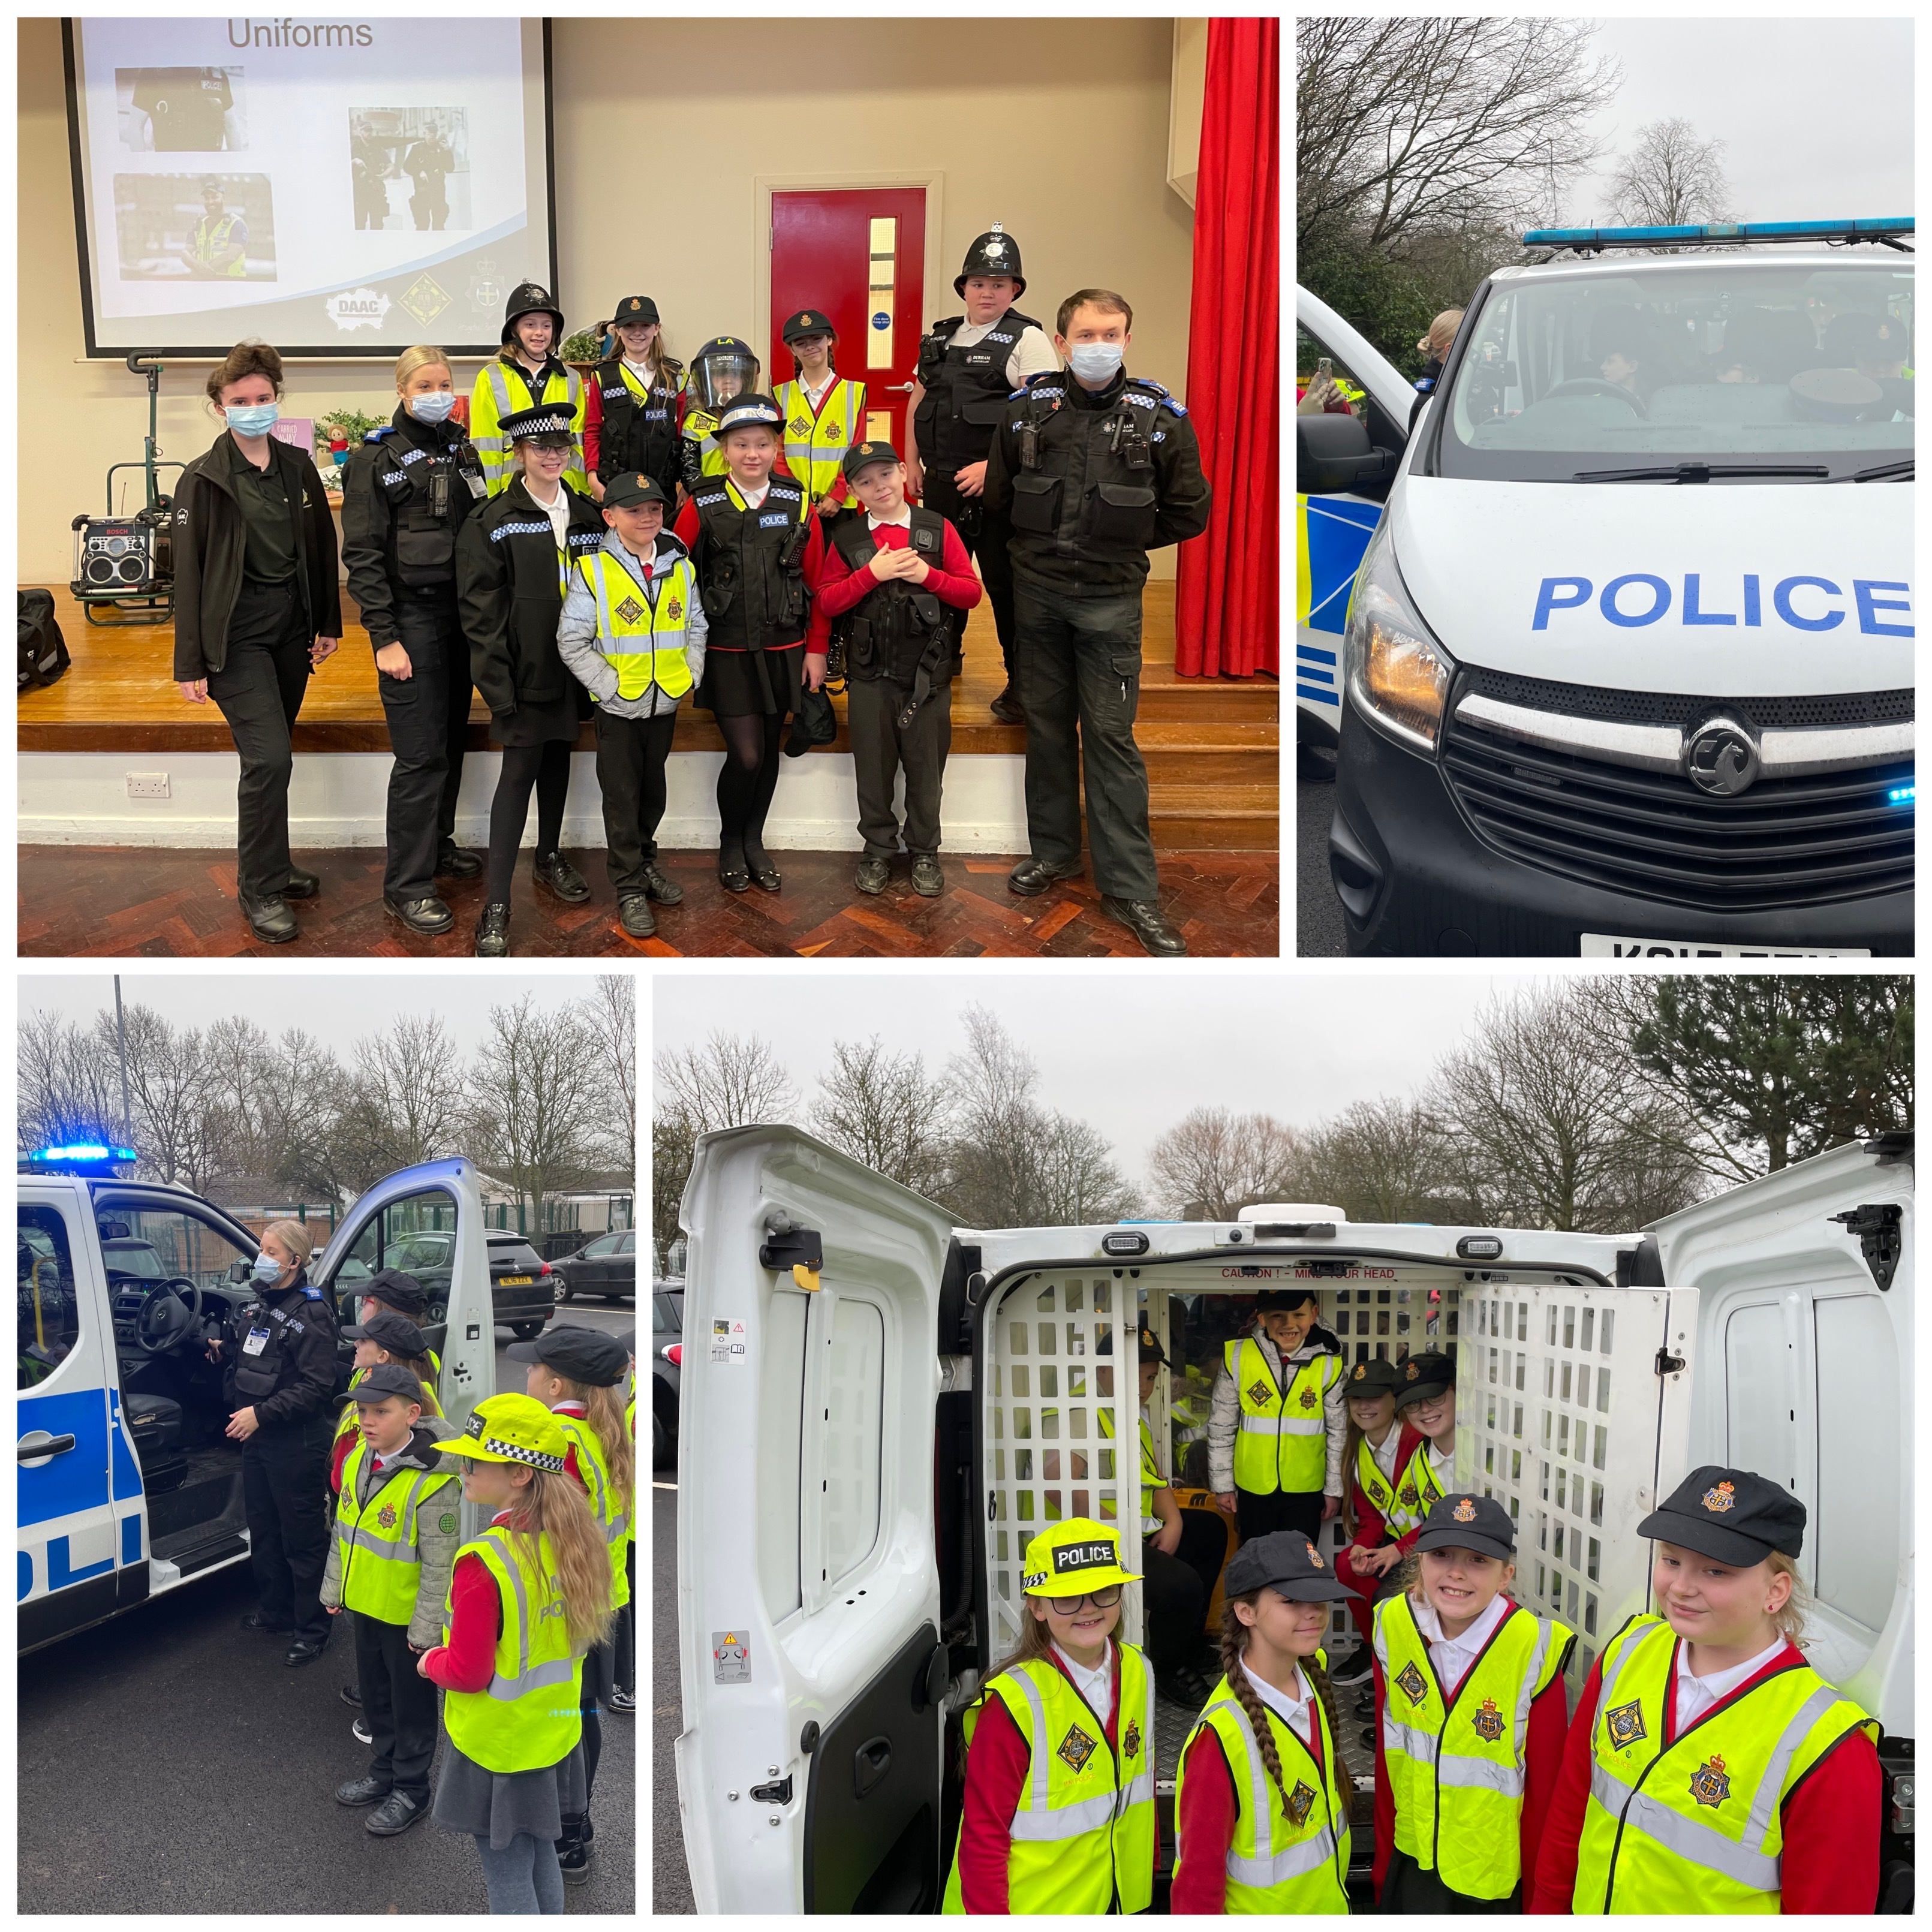 Redhall Primary school Police engagement session 